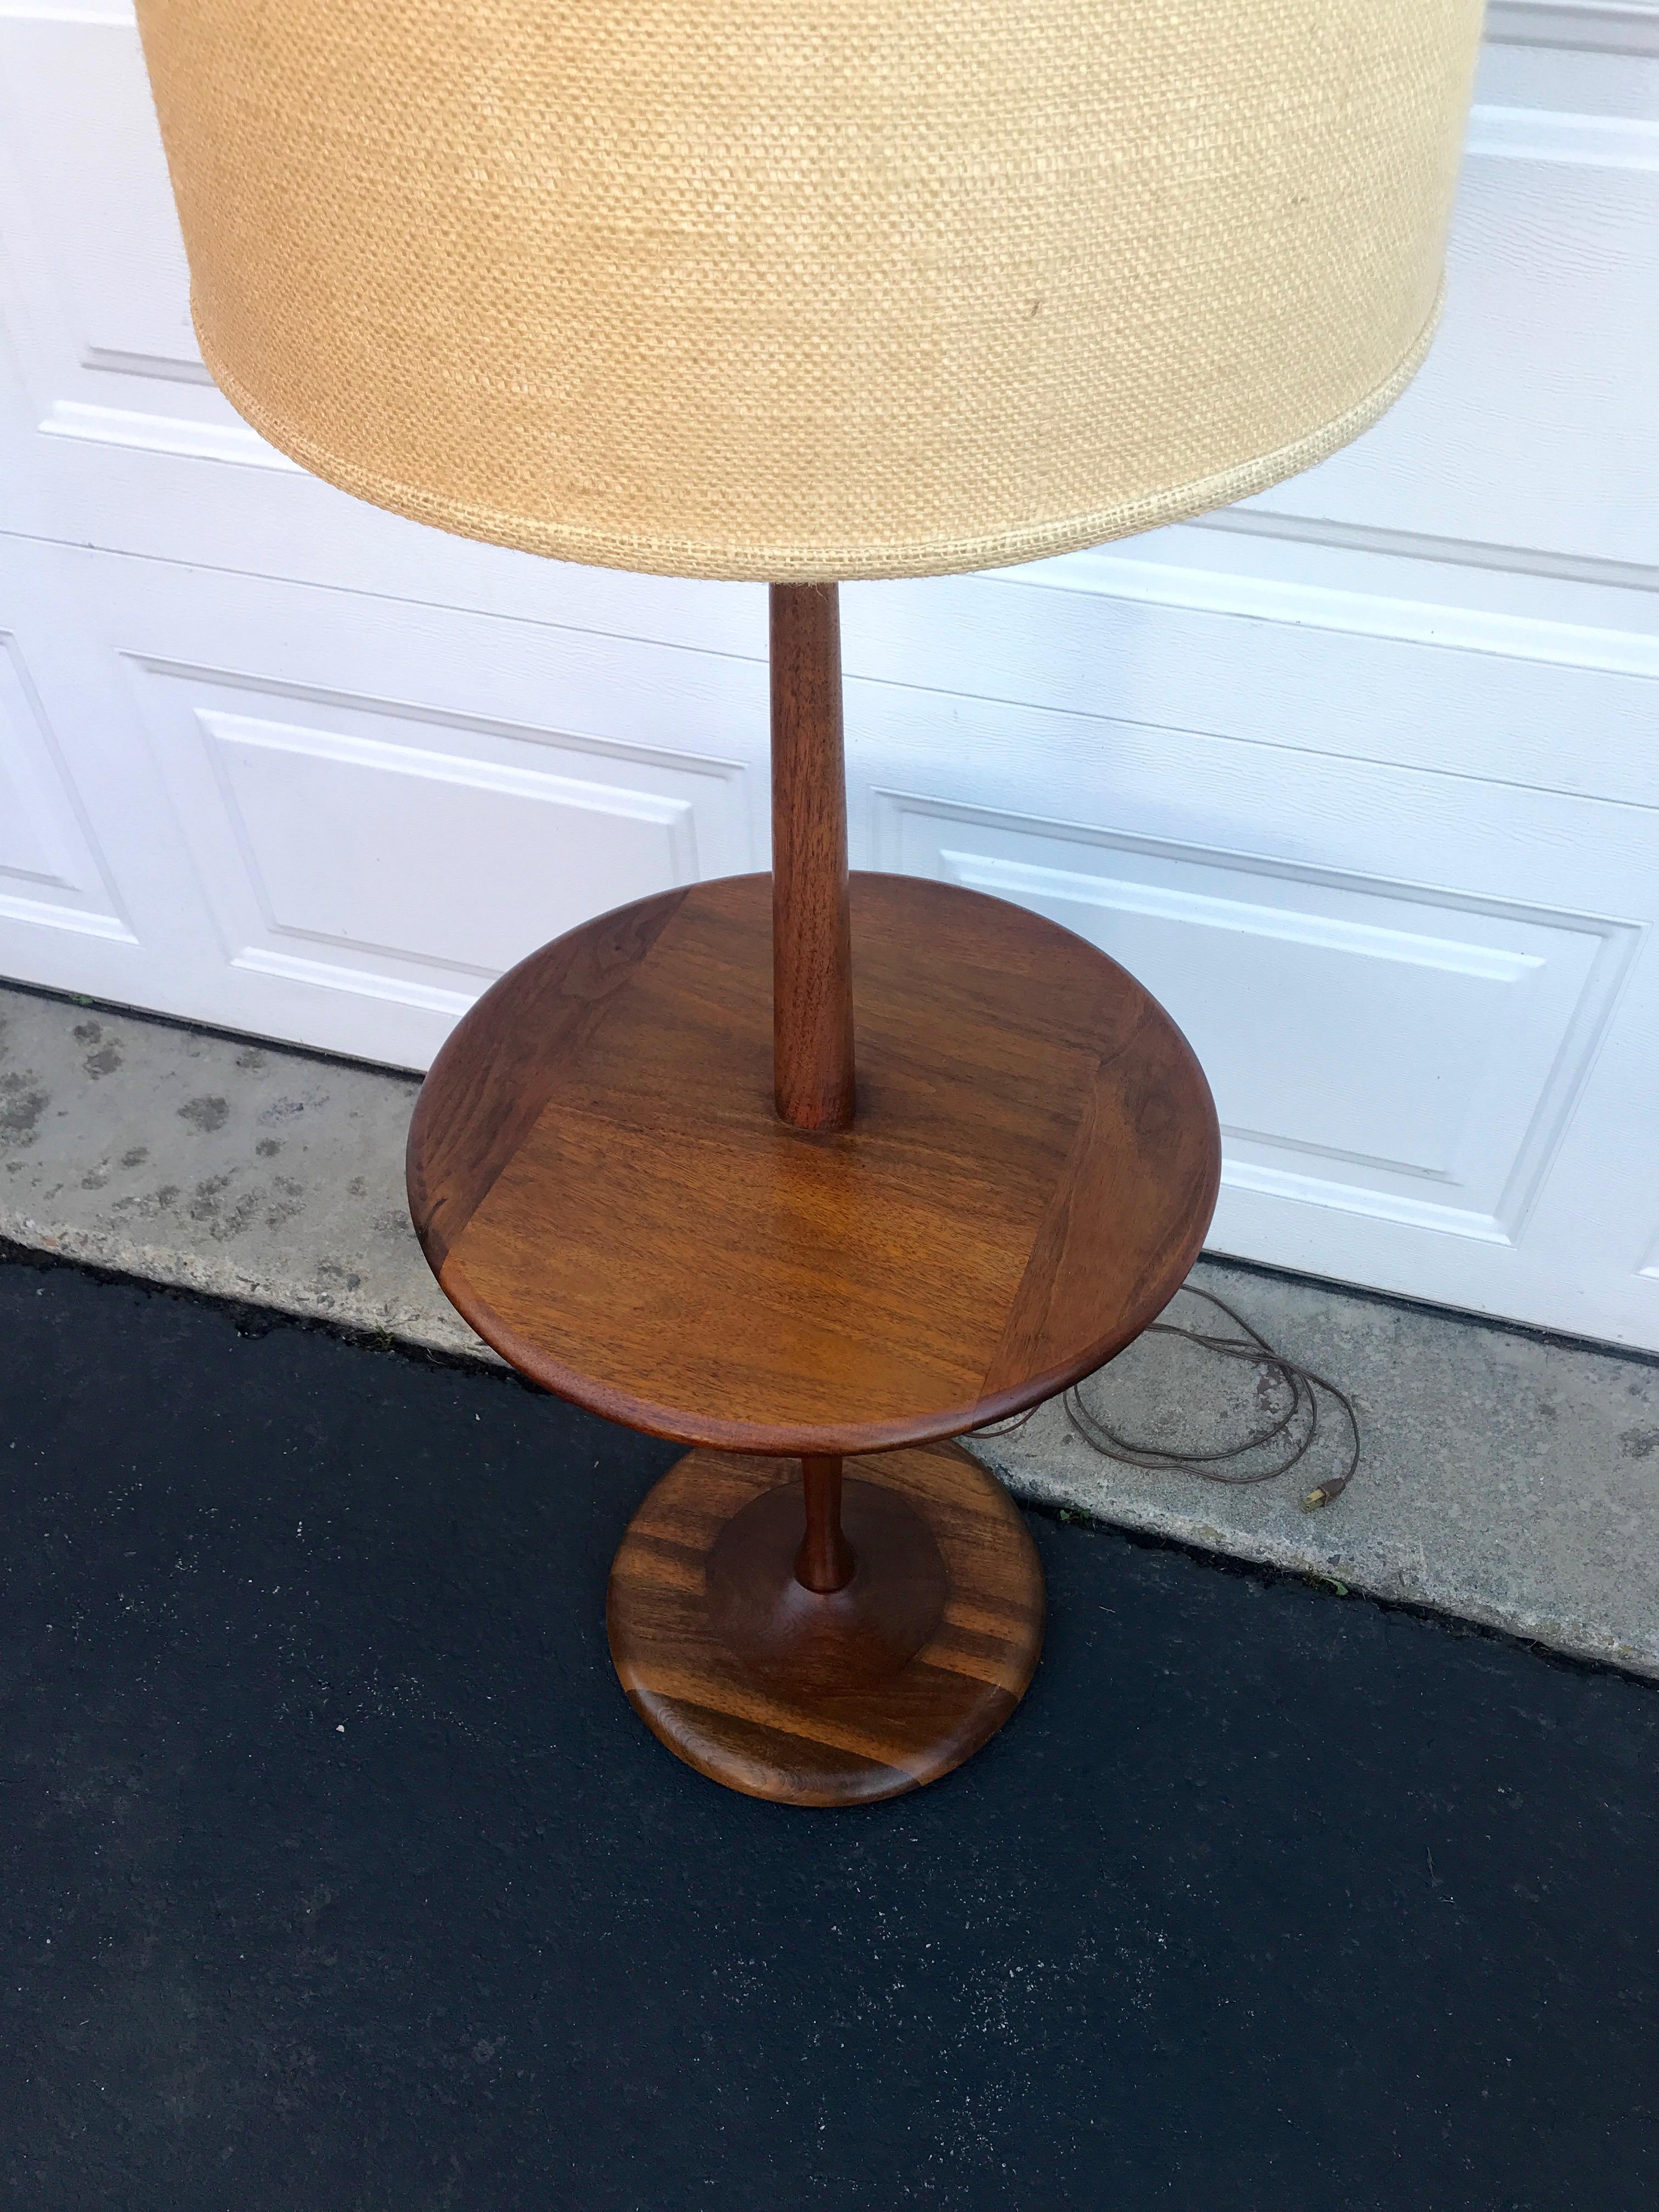 Modern floor lamp designed and manufactured by Laurel Lamp Co. in the United States, circa 1960s. This sleek, Minimalist design features a tall walnut wood body with a circular slate table surface and base that gives stability and style to the